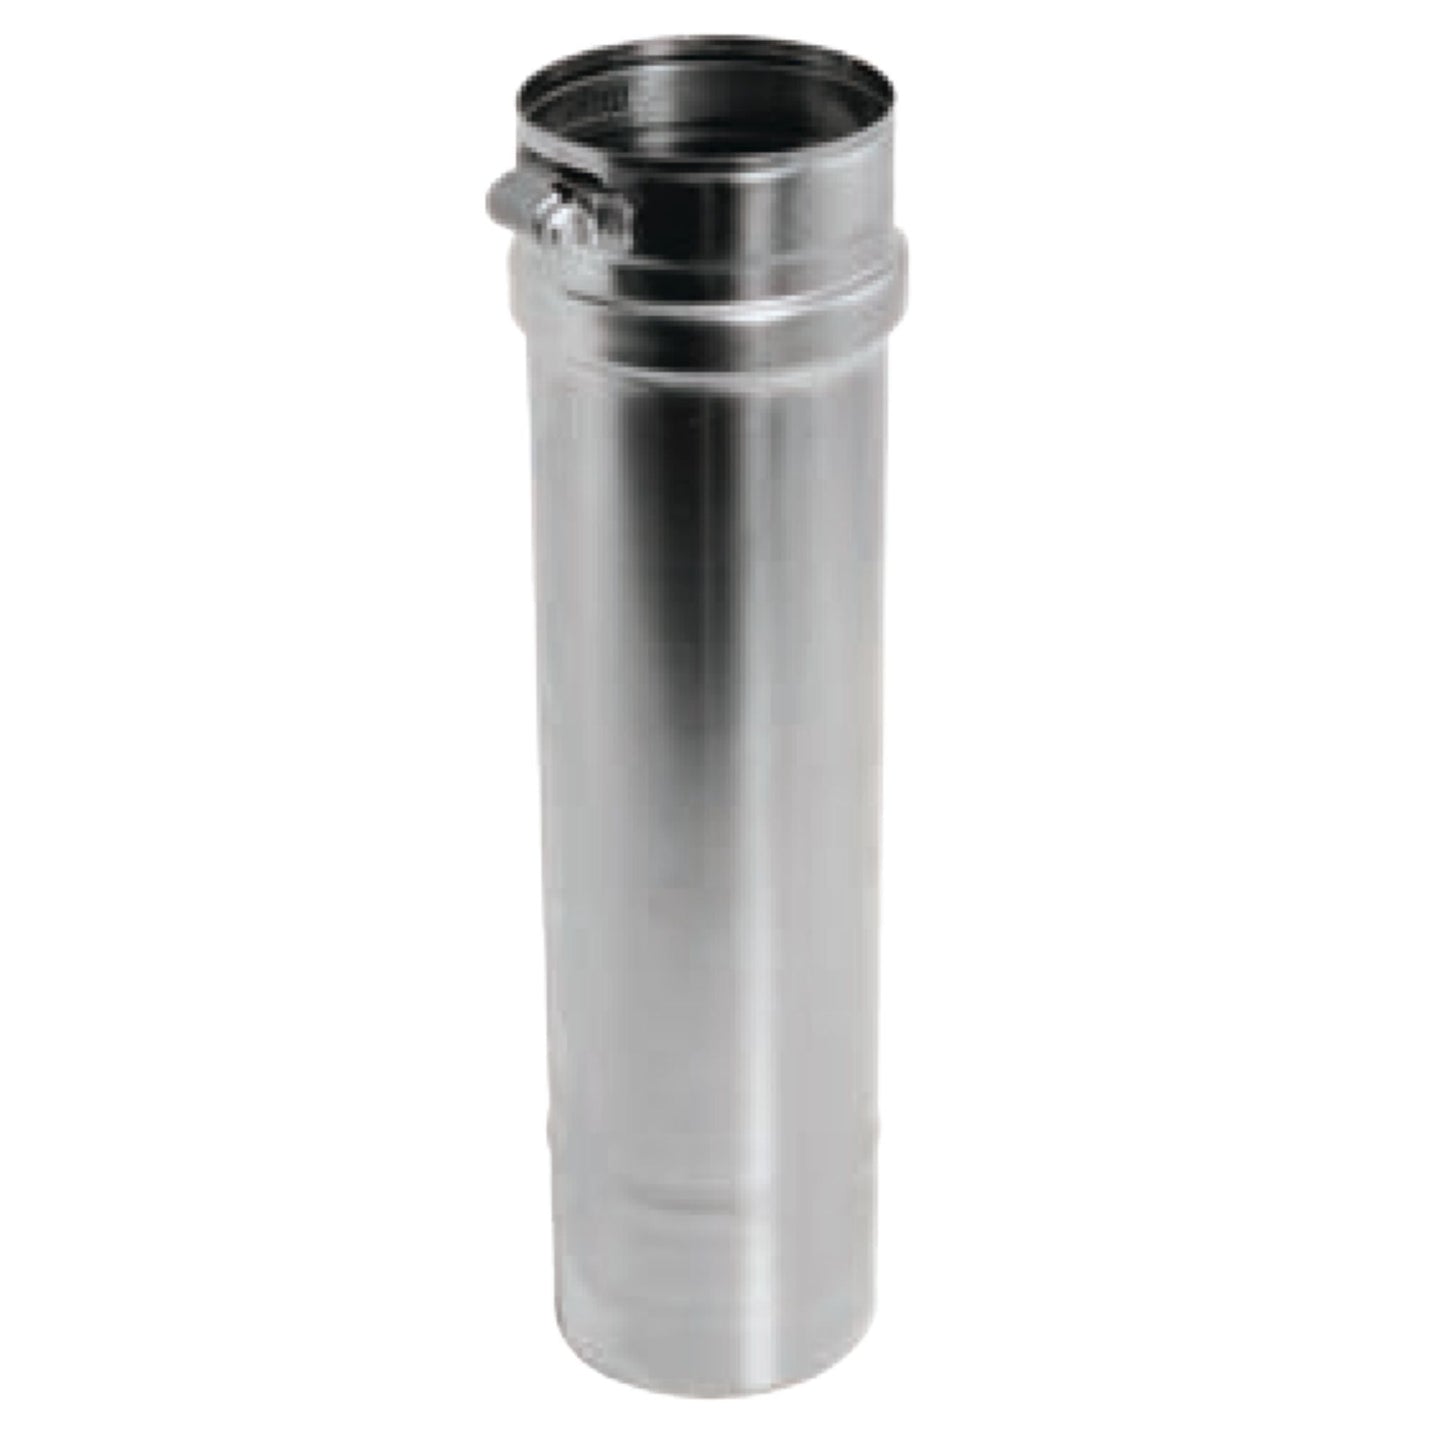 DuraVent FasNSeal 10" x 24" 29-4C Stainless Steel Vent Length